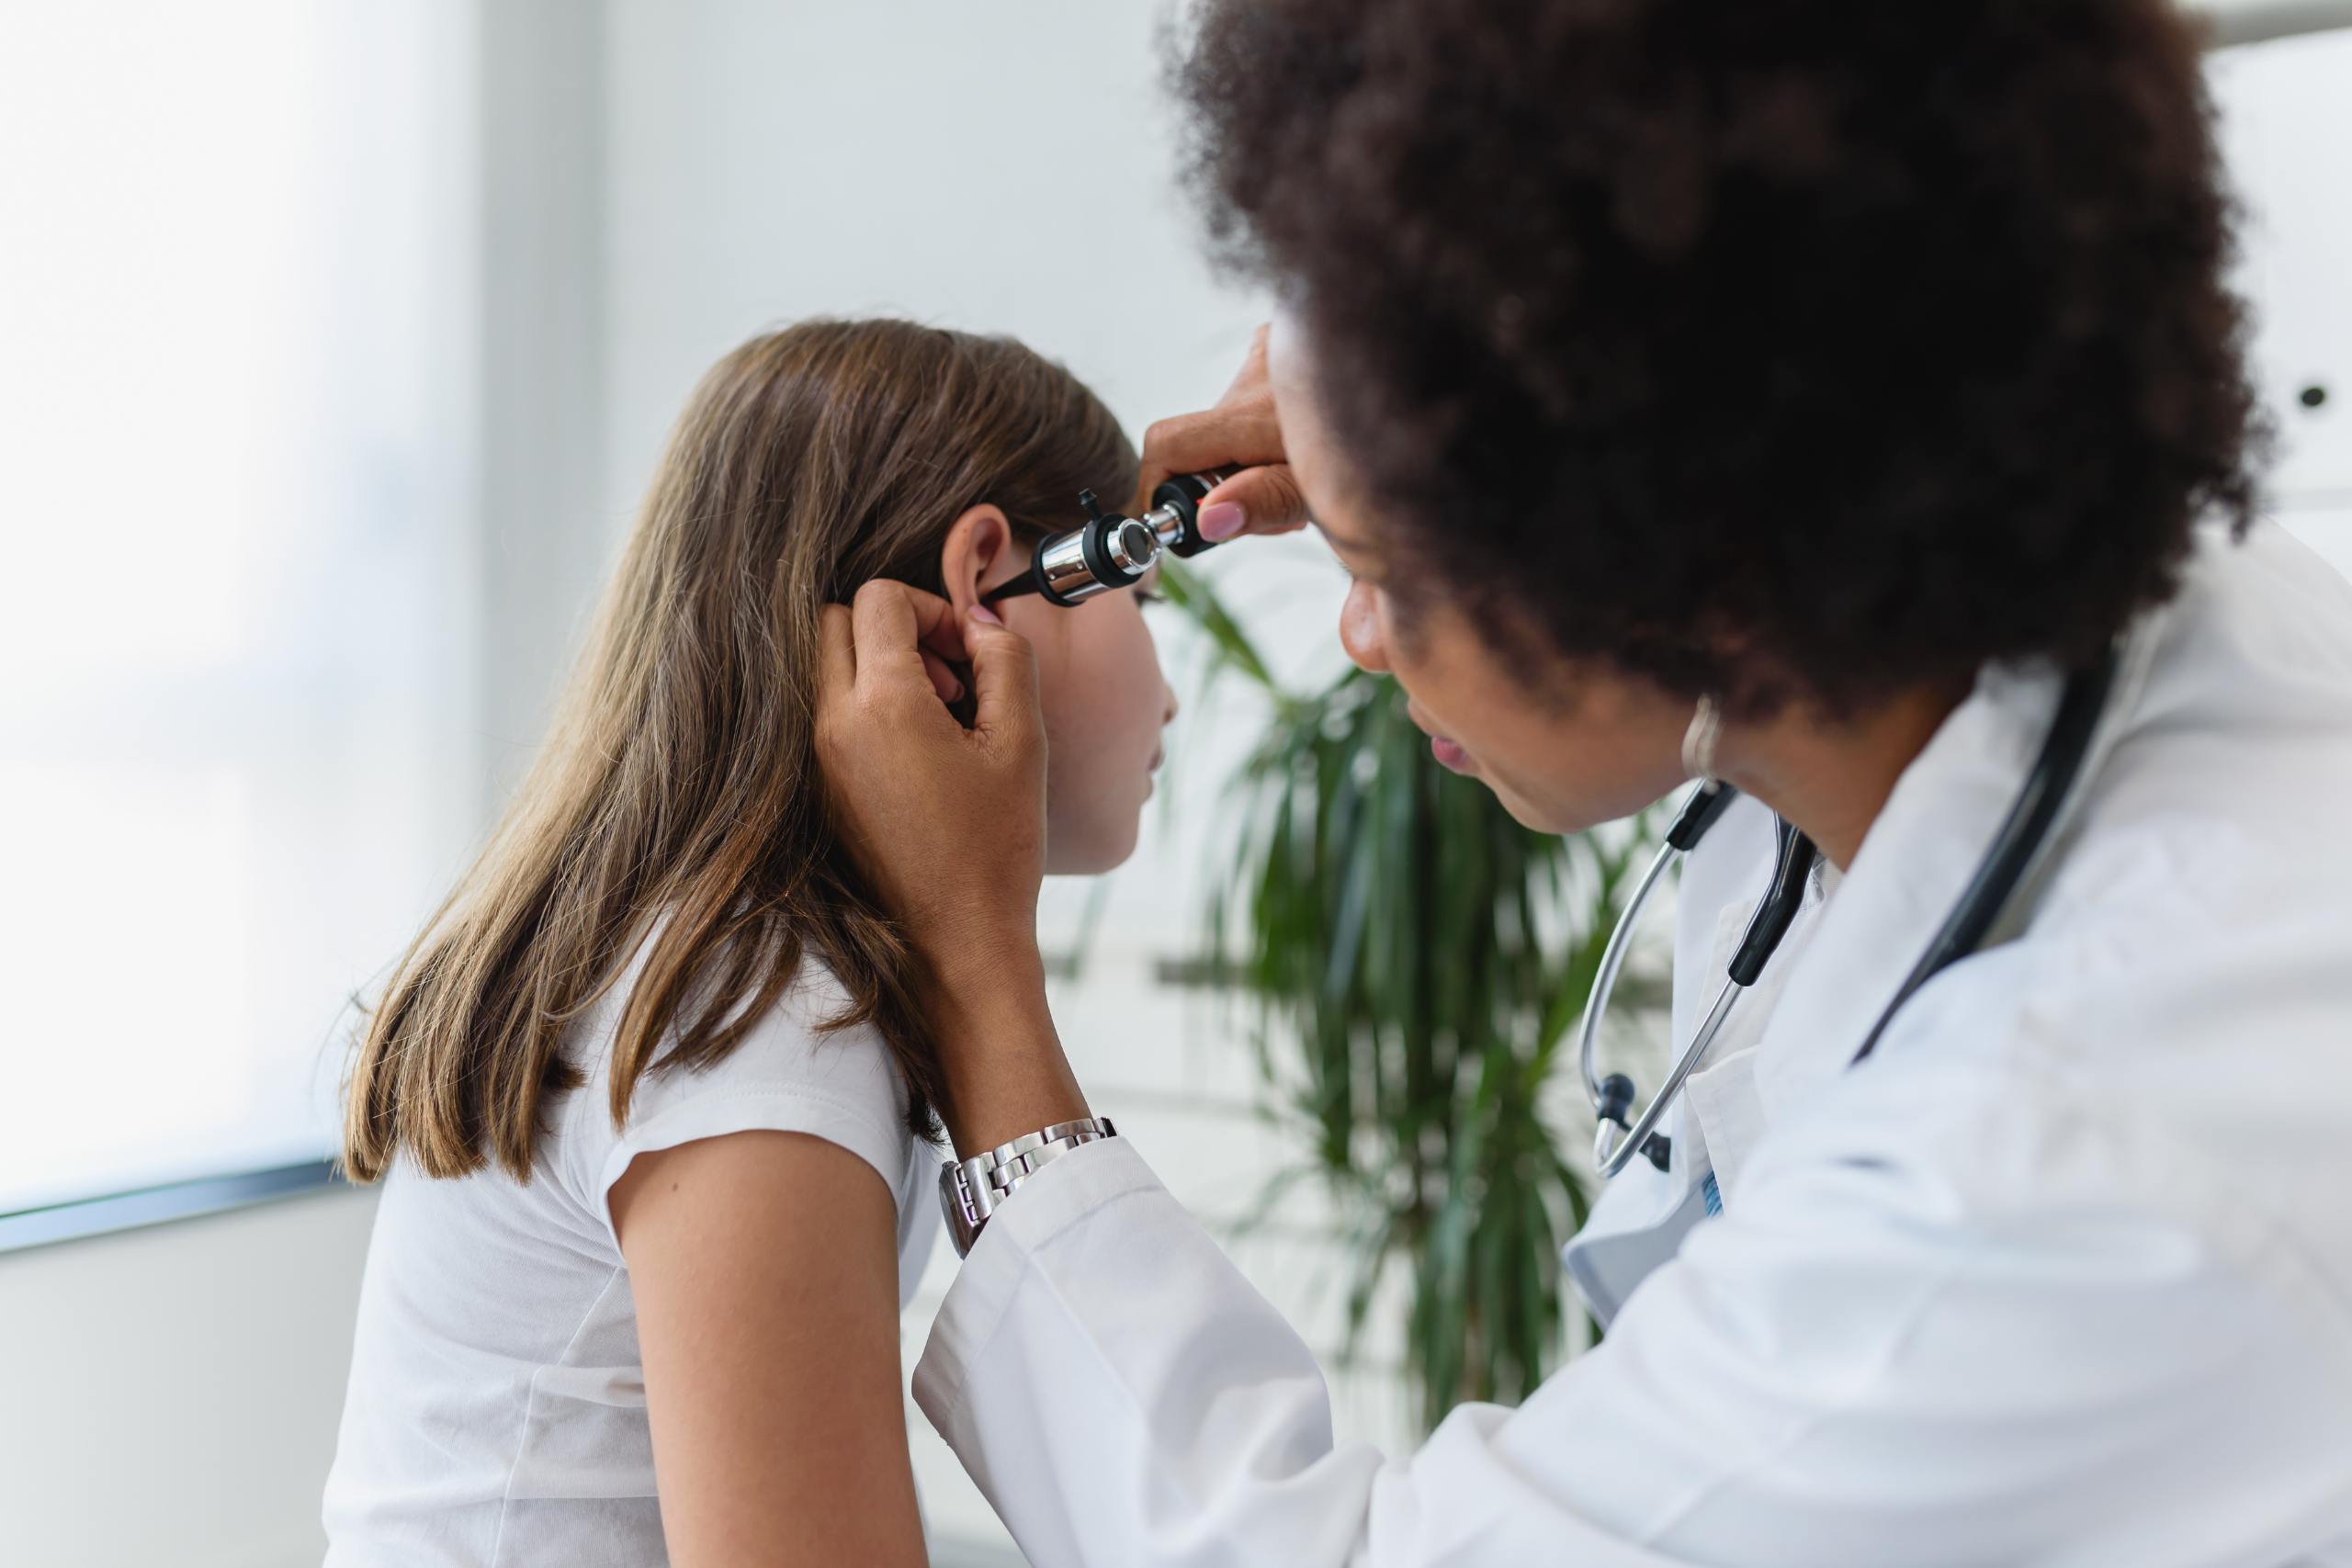 Doctor checks for ear infection